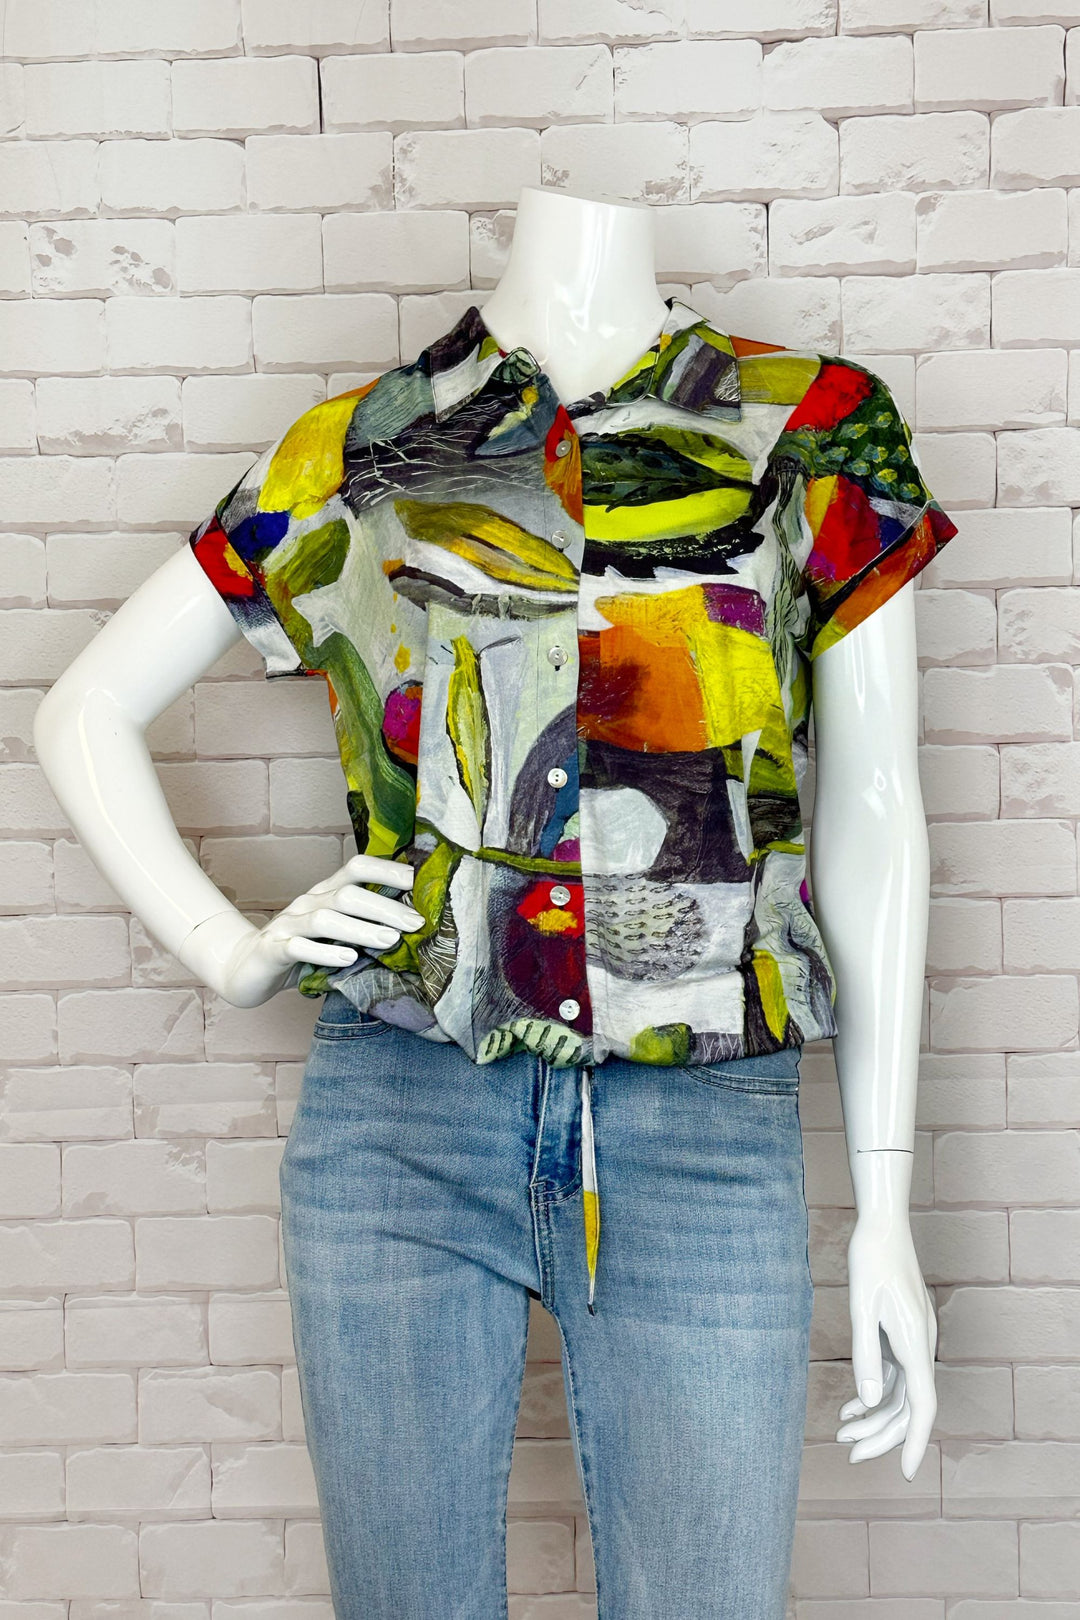 This Botanica blouse is a vibrant and versatile piece, featuring short sleeves, front buttons, a tie waist and a capitivating bold floral abstract pattern.